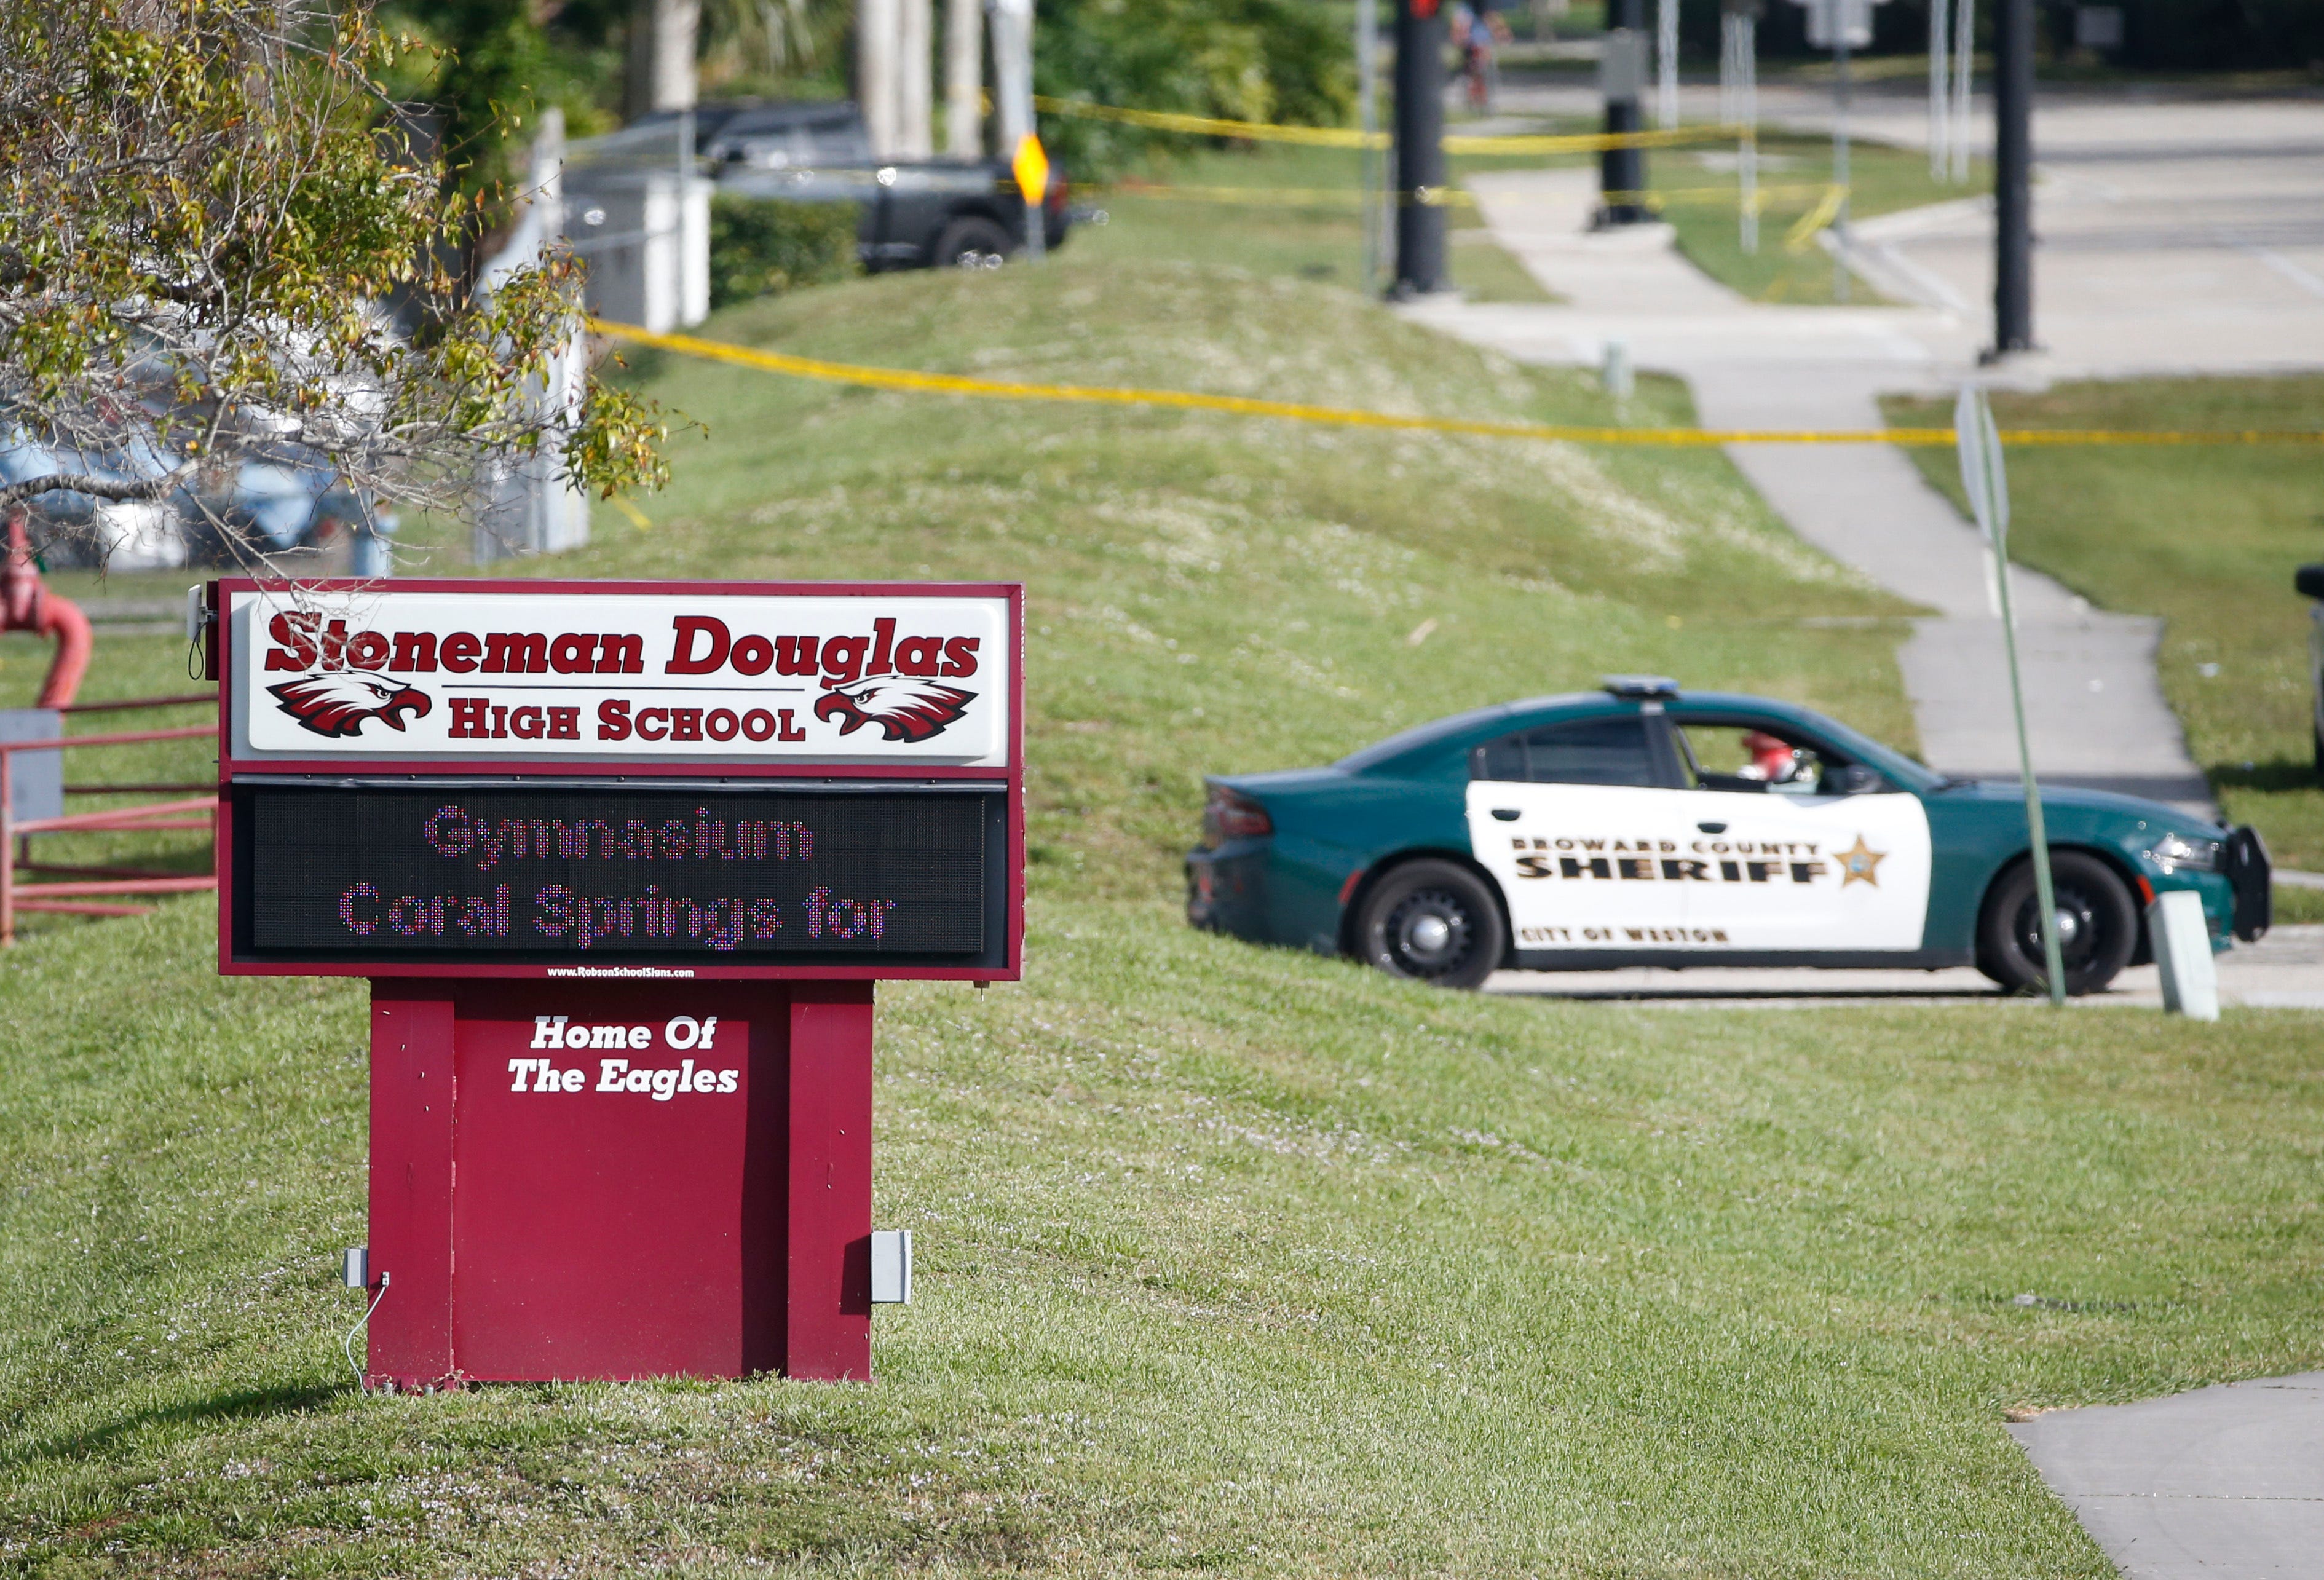 Florida school shooting: Hoaxes, doctored tweets and Russian bots spread false news